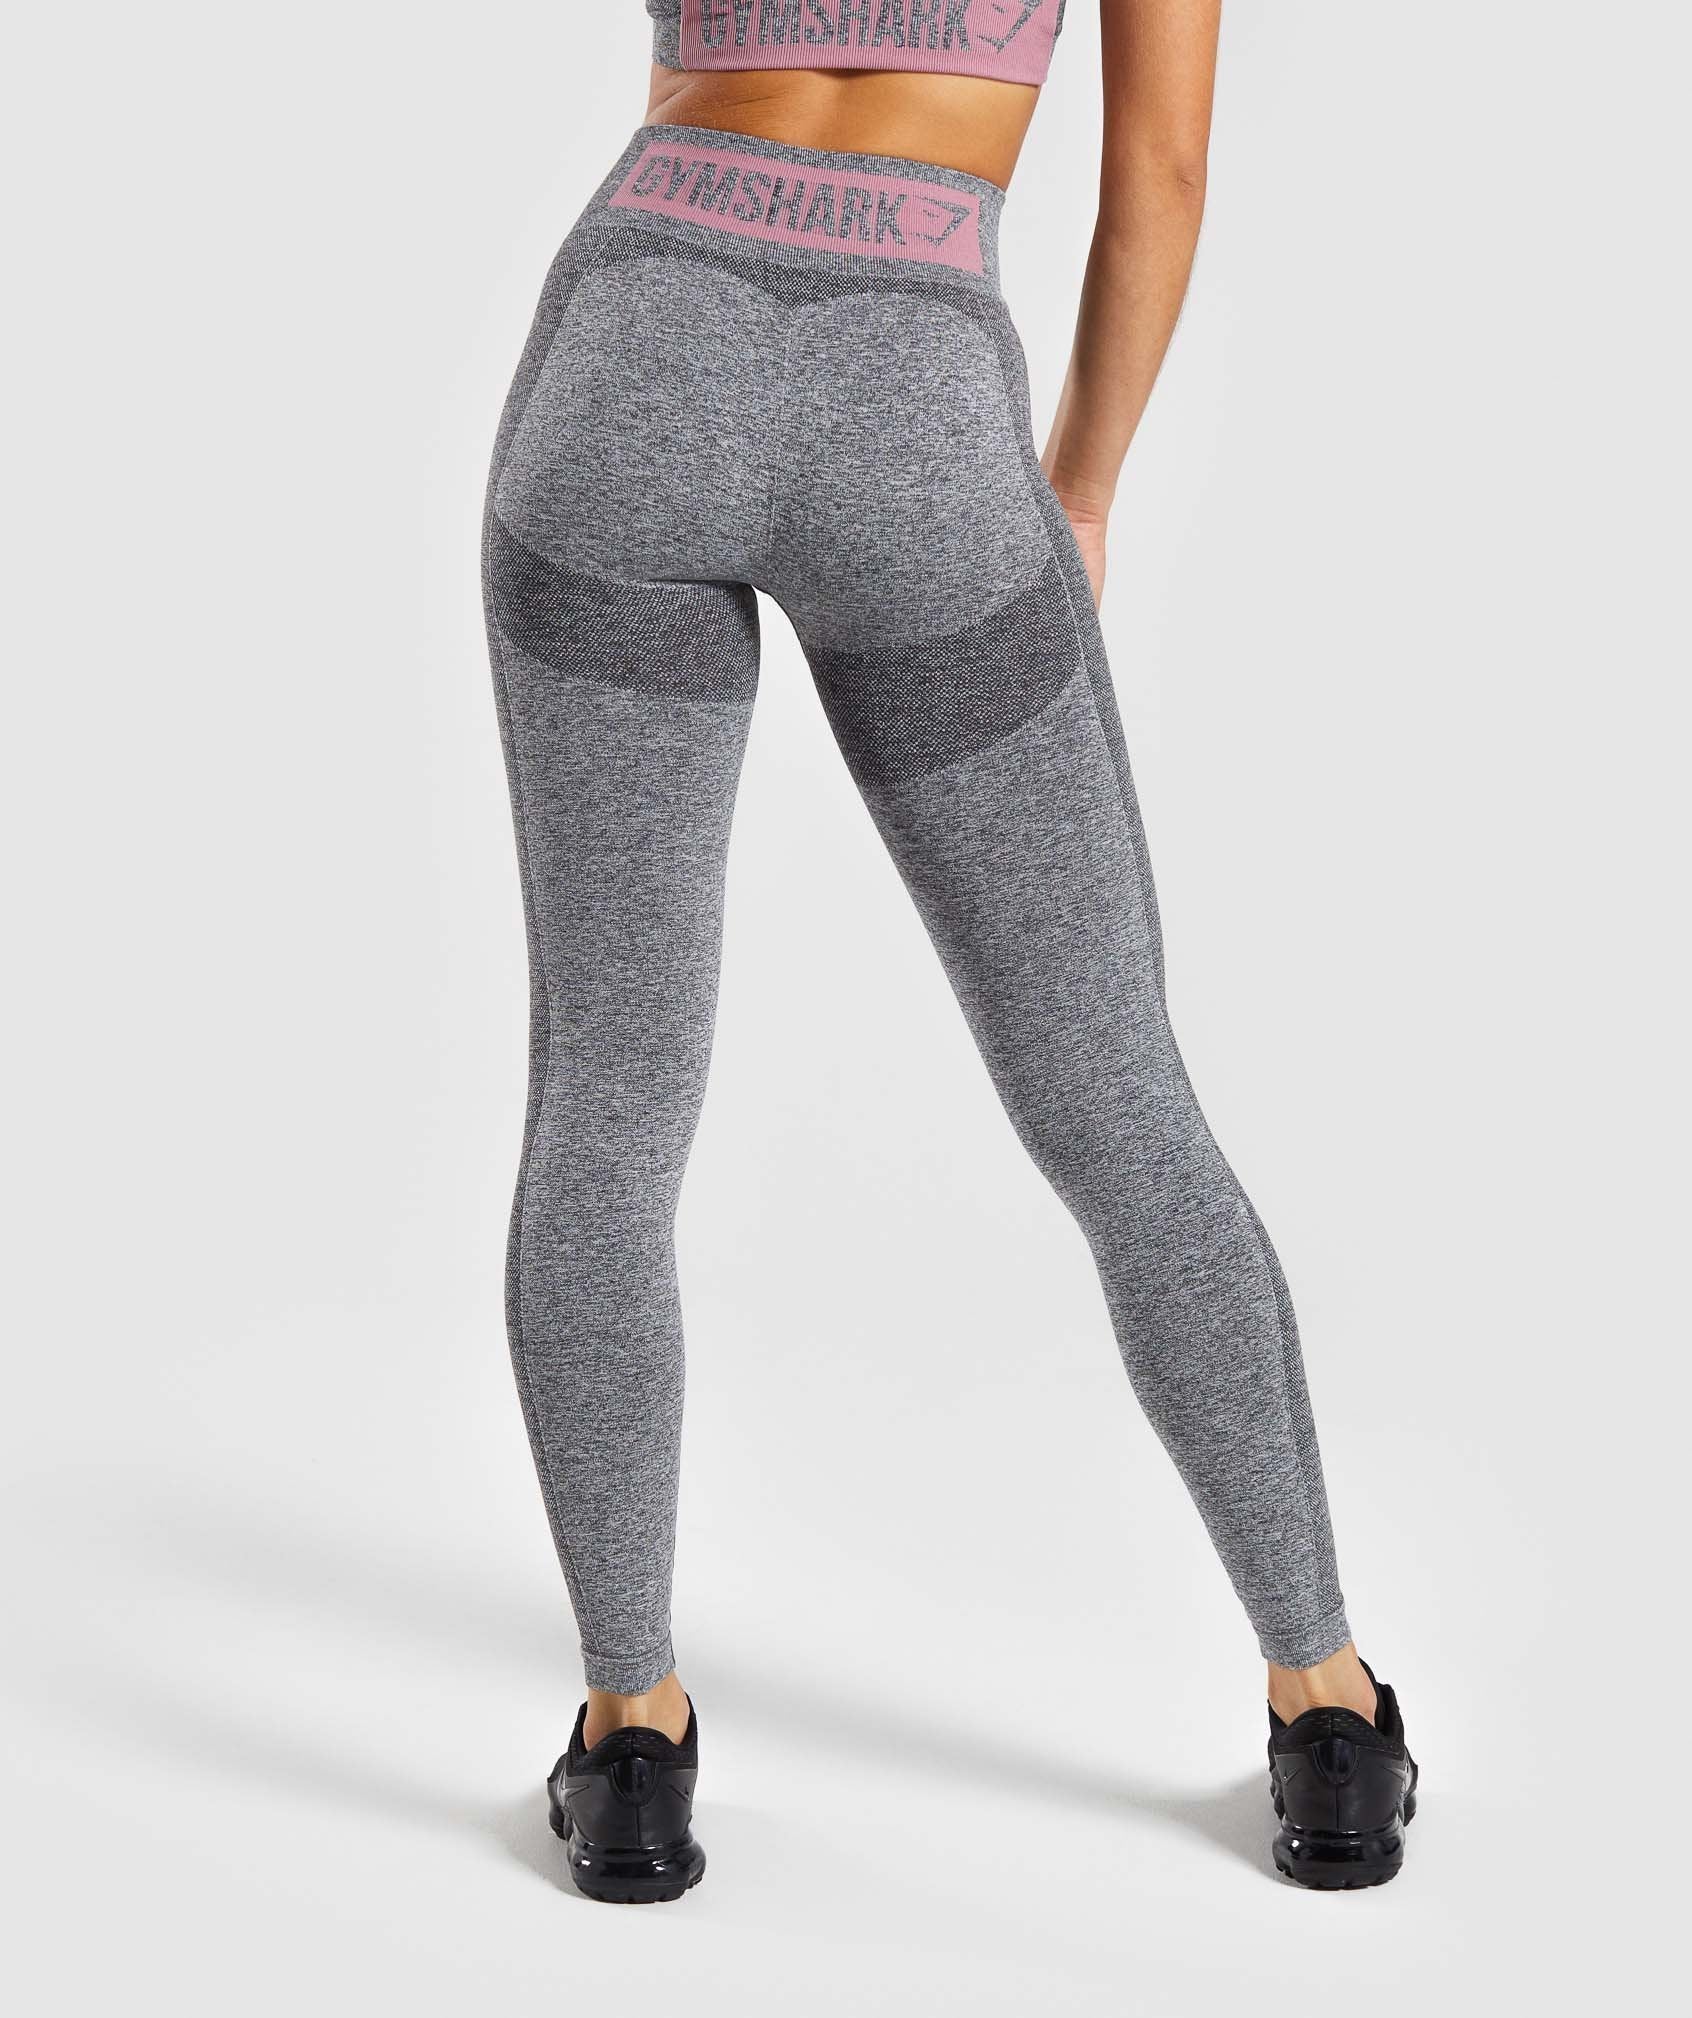 Gymshark Flex High Waisted Leggings Gray and Pink Size XS